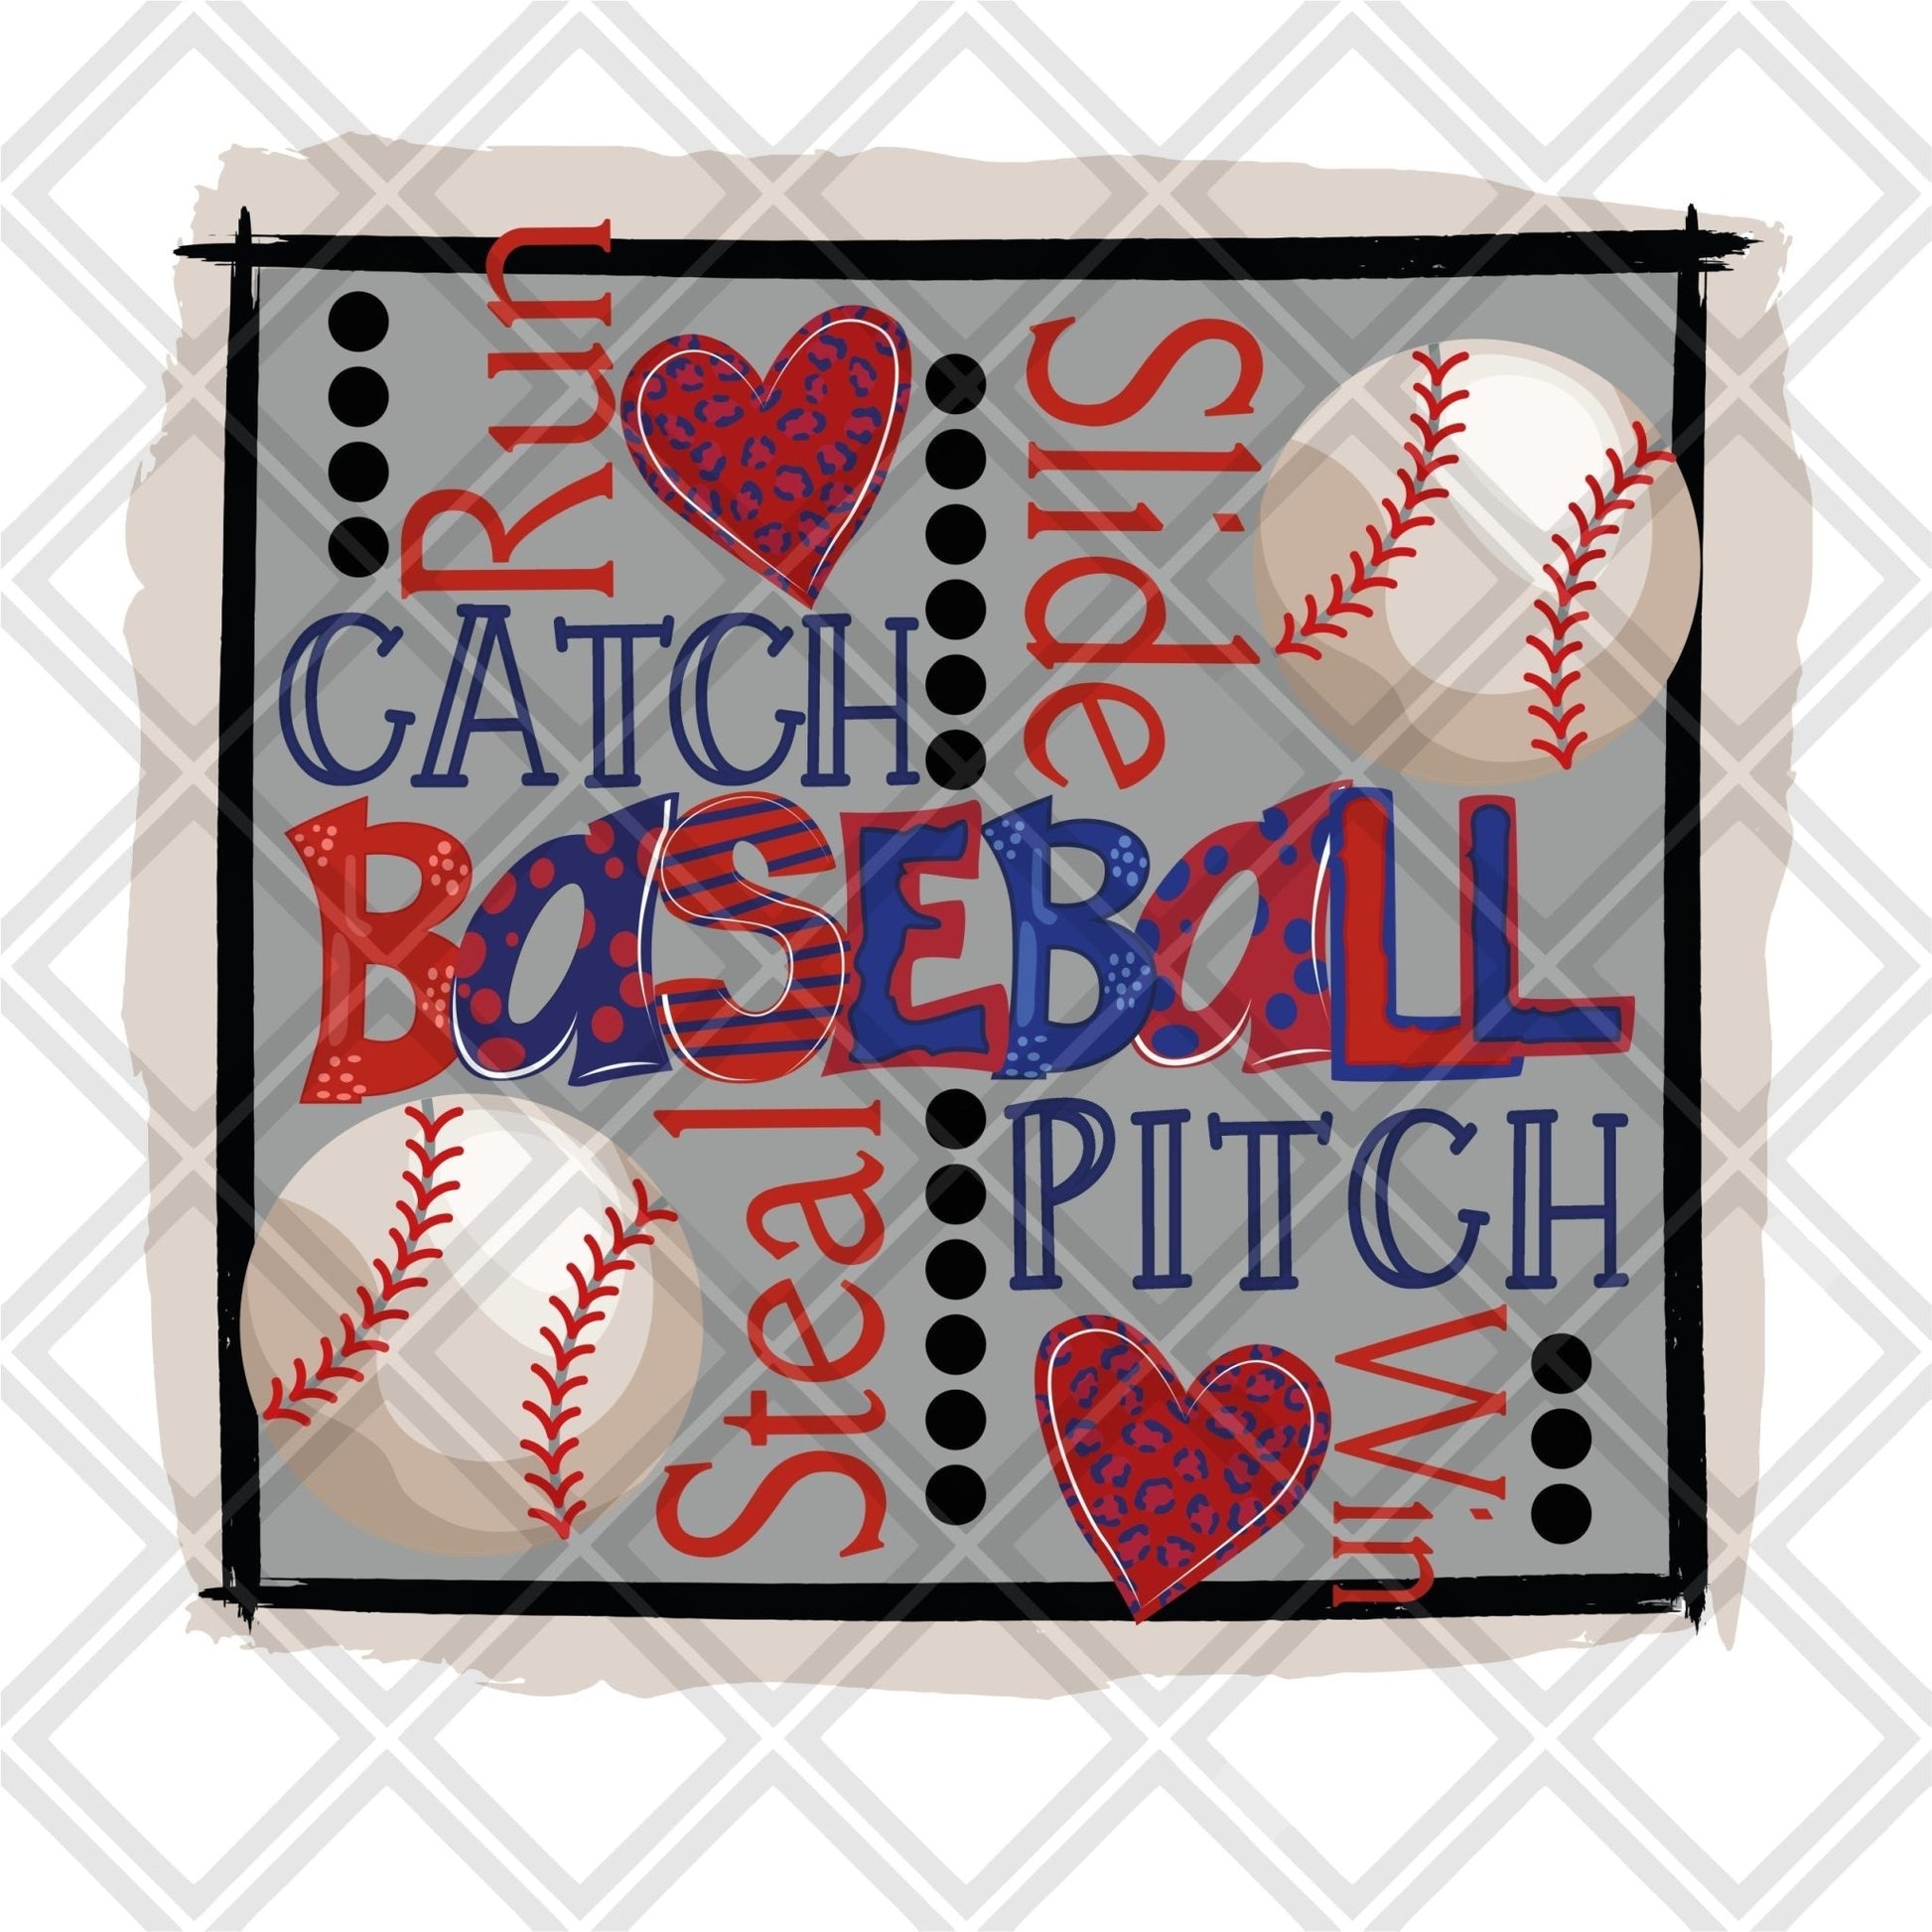 Baseball Catch Pitch steal win run slide DTF TRANSFERSPRINT TO ORDER - Do it yourself Transfers